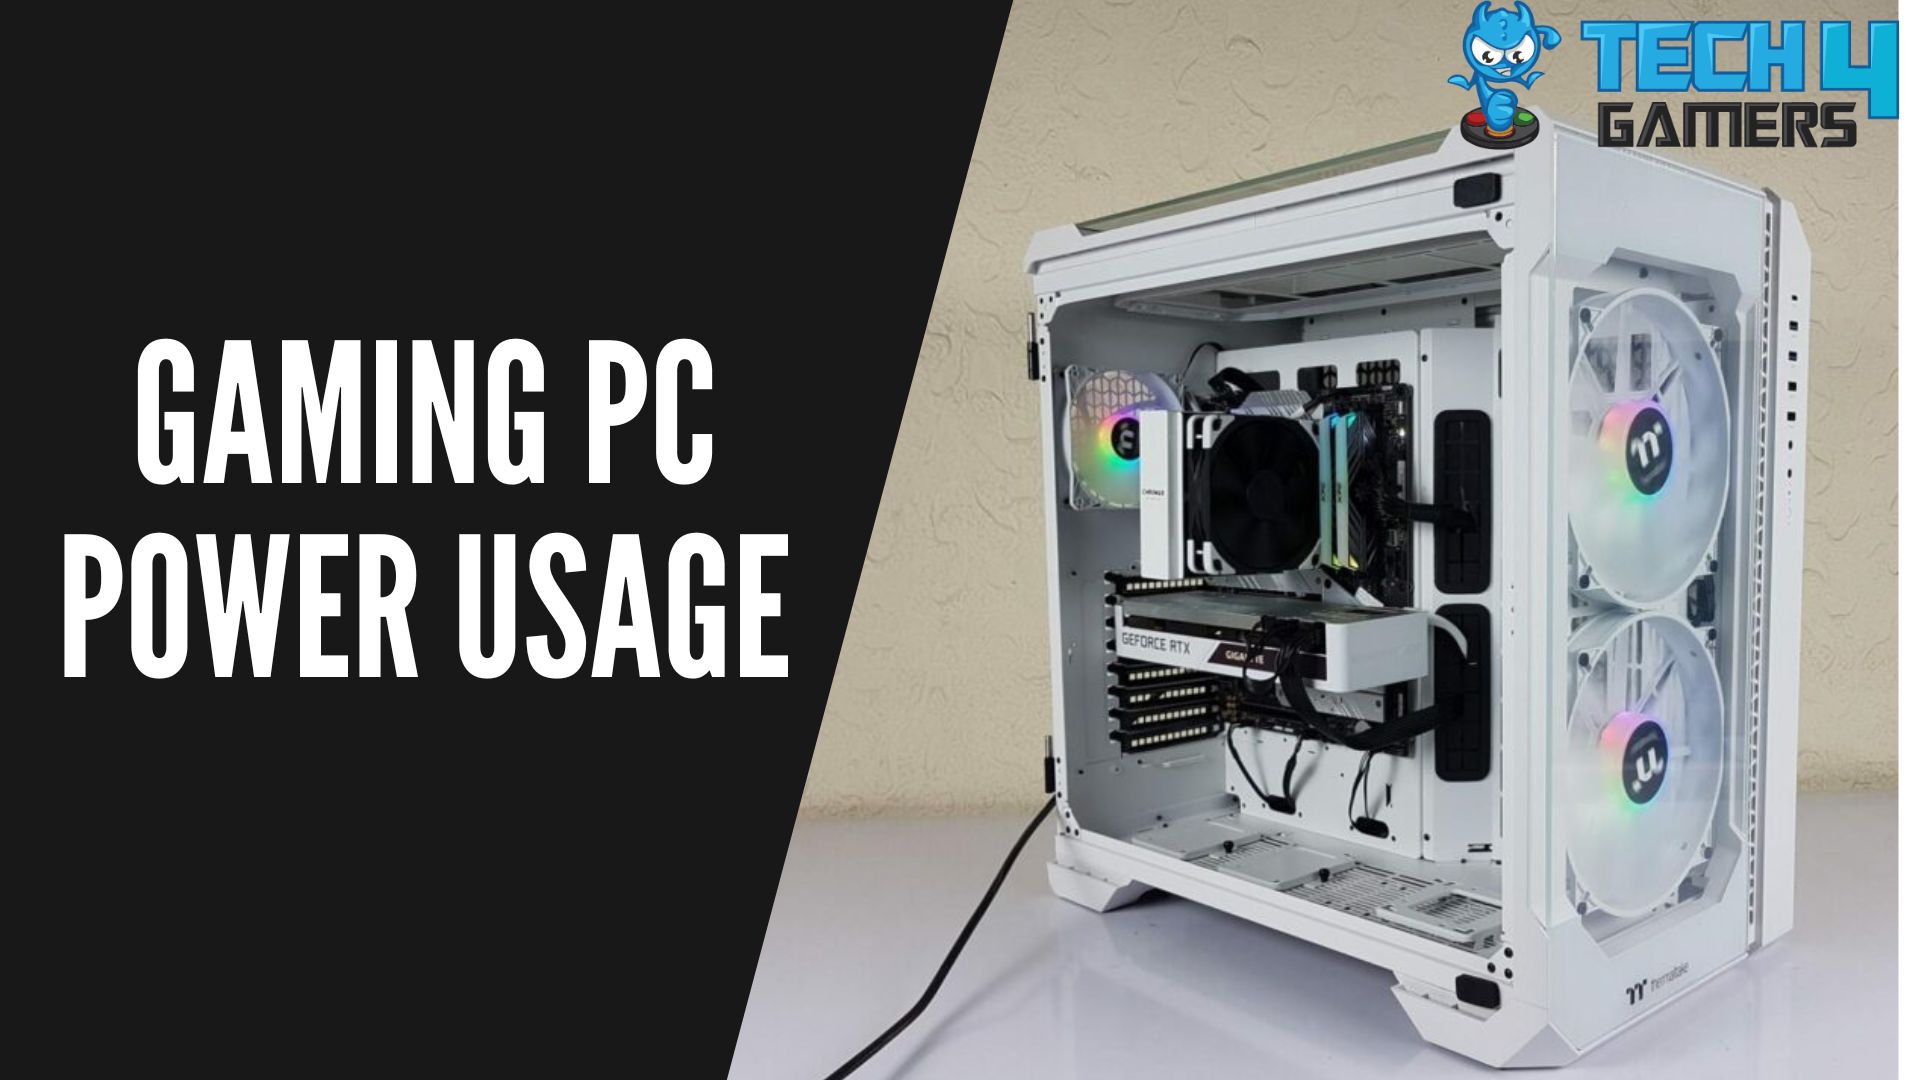 PC Power Usage: How Much Is Required? - Tech4Gamers